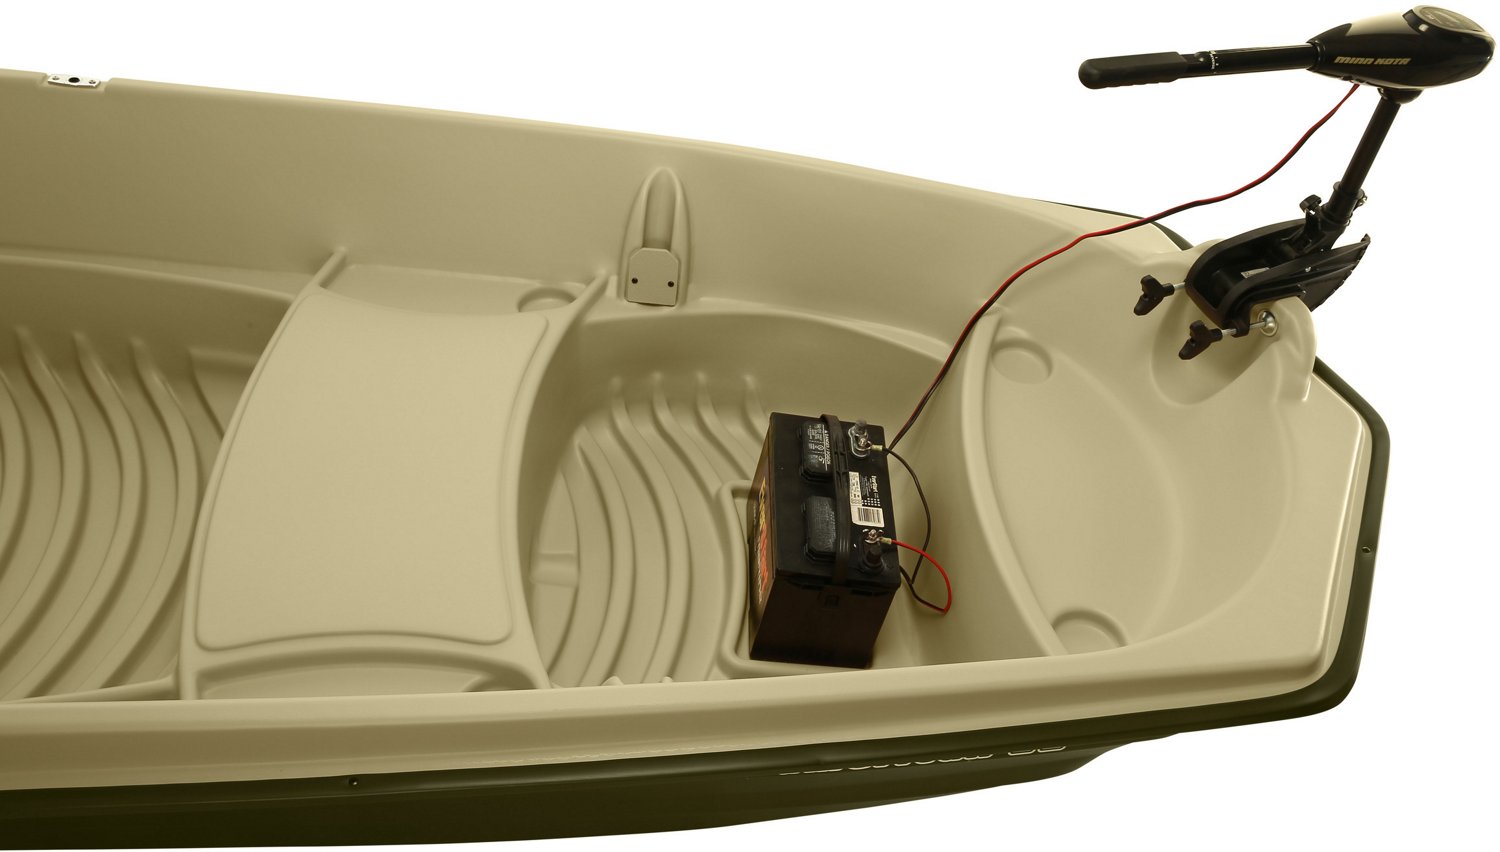 Sun Dolphin American 12 ft 2-Person Fishing Jon Boat                                                                             - view number 4